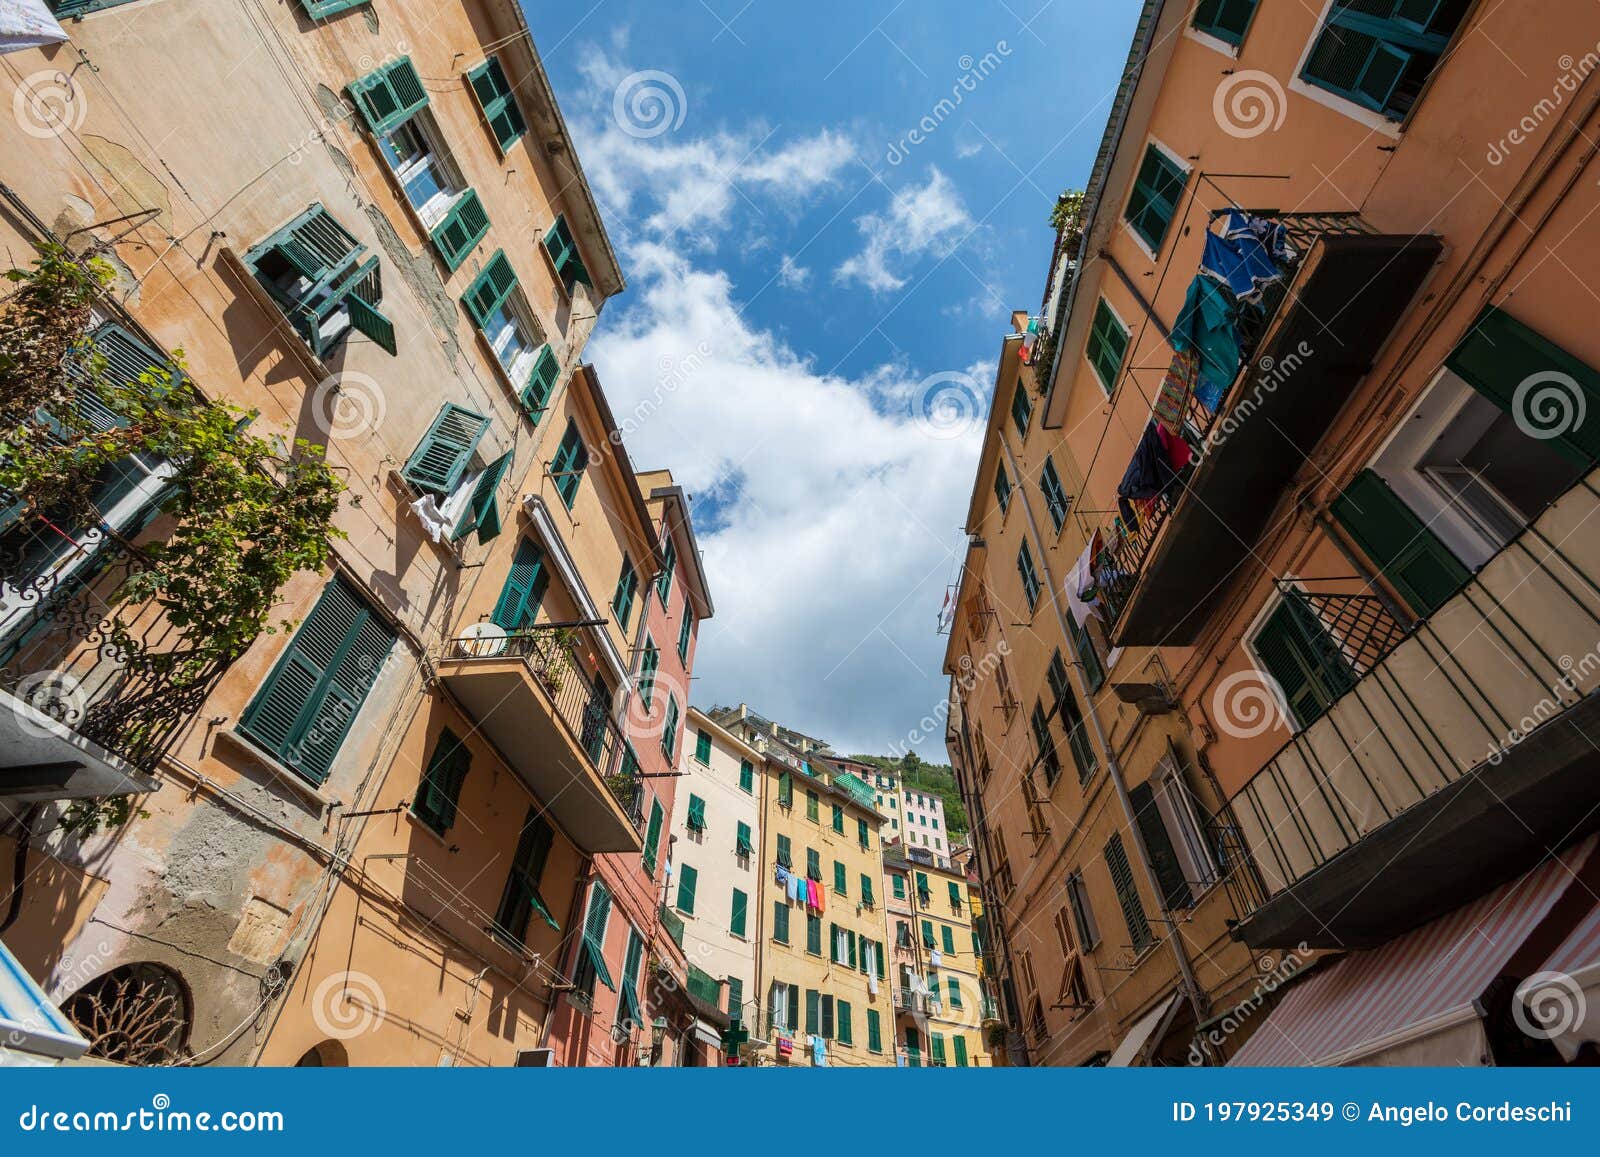 Perspective view of colored houses in the city of Riomaggiore in Italy. Blue sky. Palaces with balconies and windows.